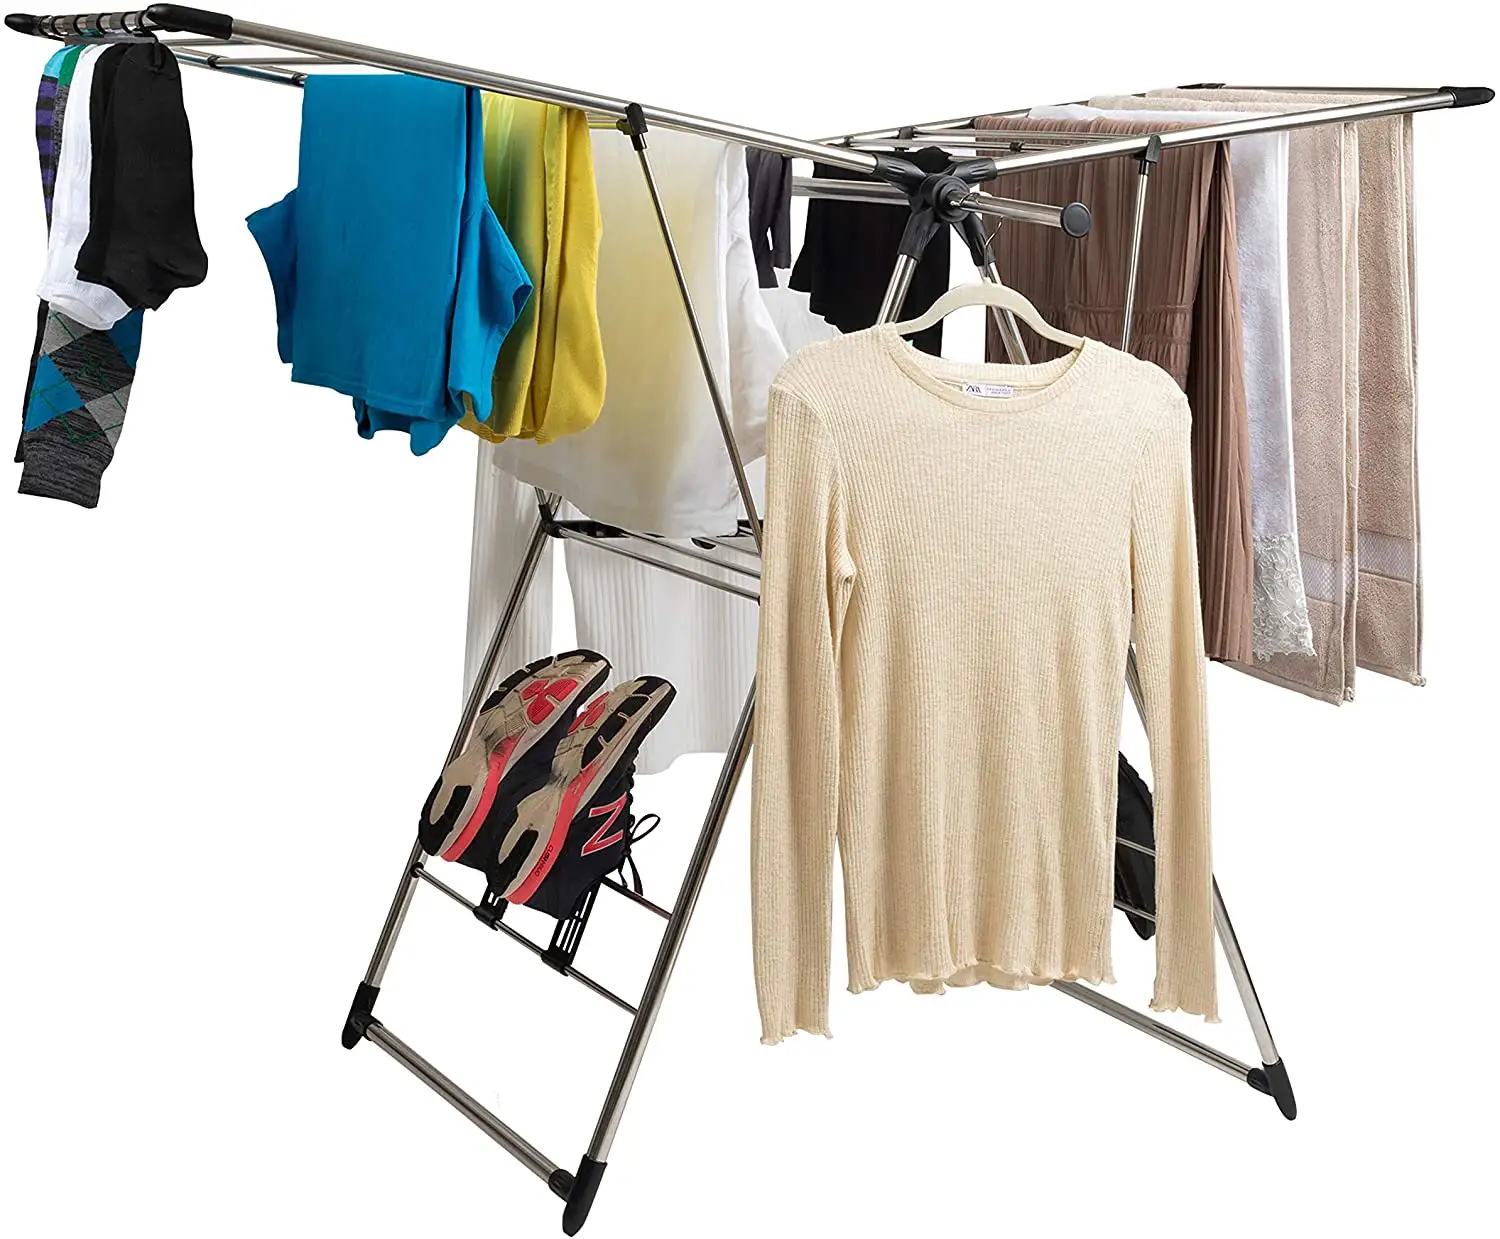 Stainless Steel Clothes Drying Rack - Laundry Rack with Hanging Rods, Sock Clips and Shoe Hangers - Adjustable Gullwing and Fold